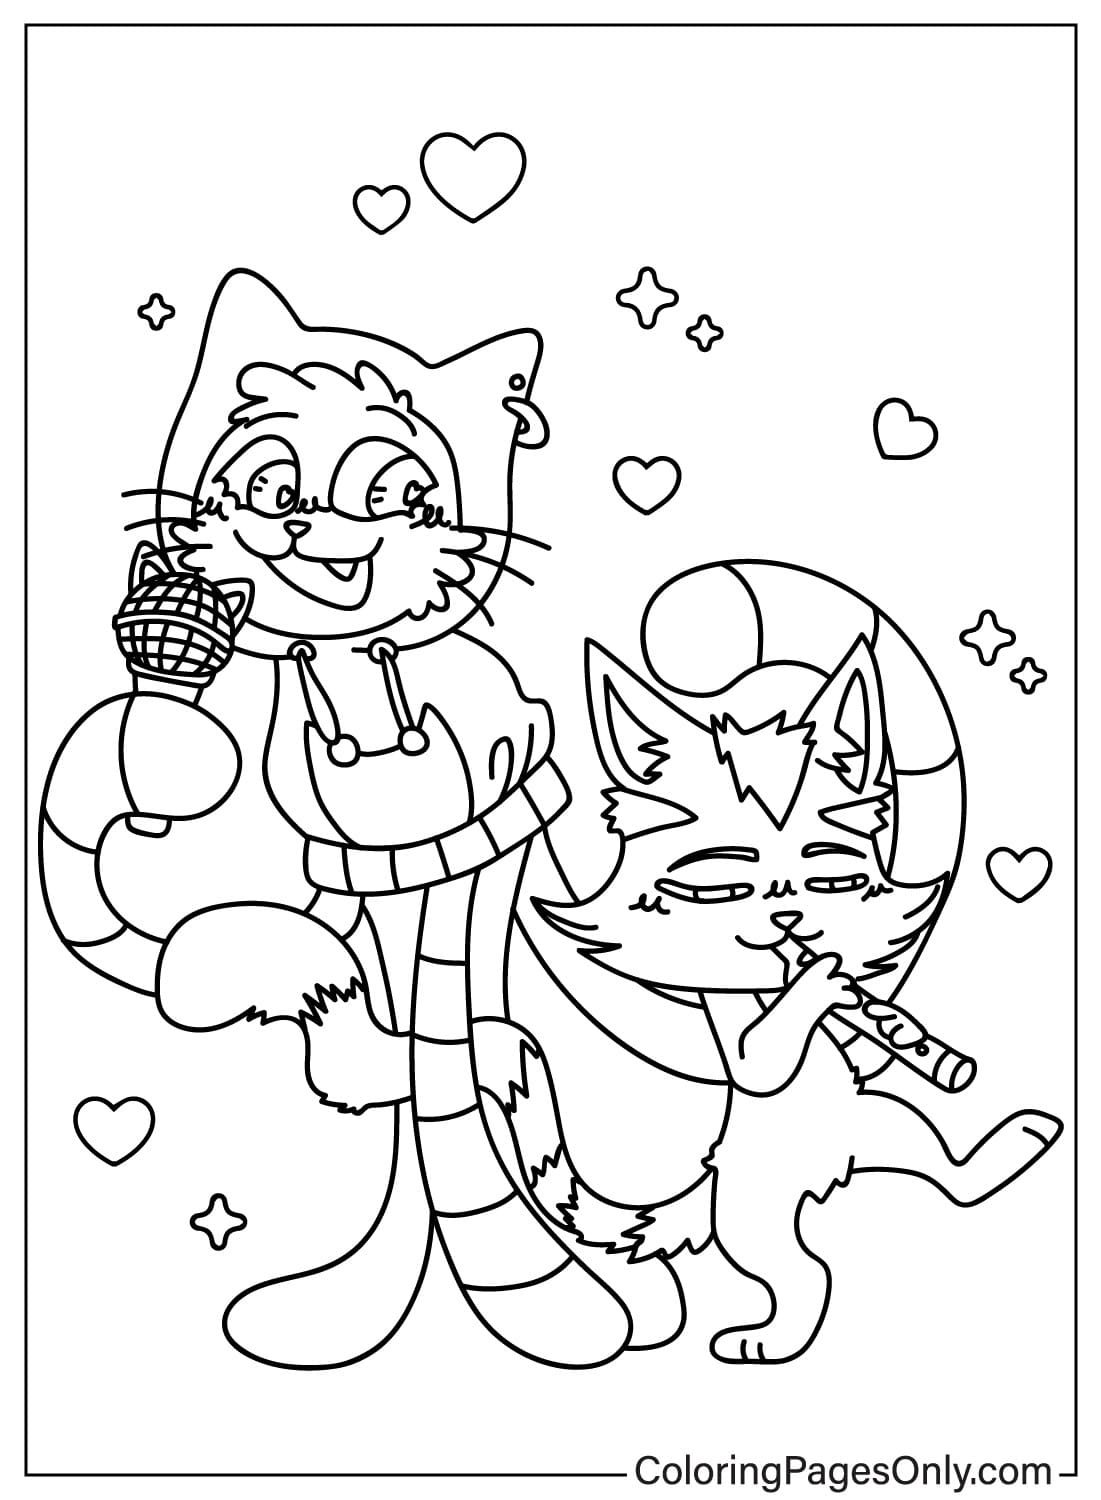 DJ Catnip and Catrat Coloring Page